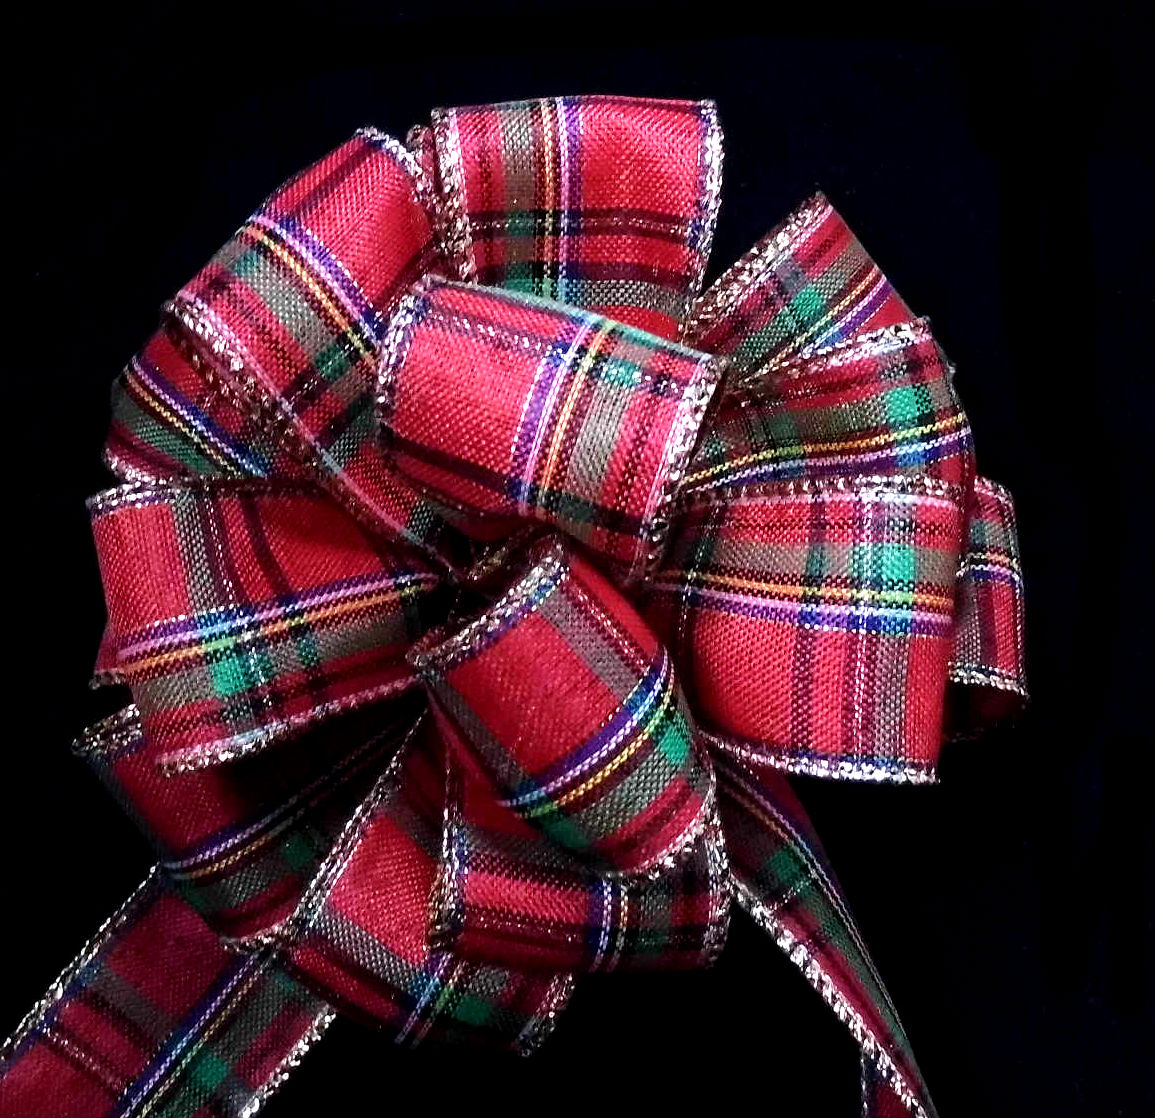 Wired Fuchsia Plaid Ribbon from American Ribbon Manufacturers